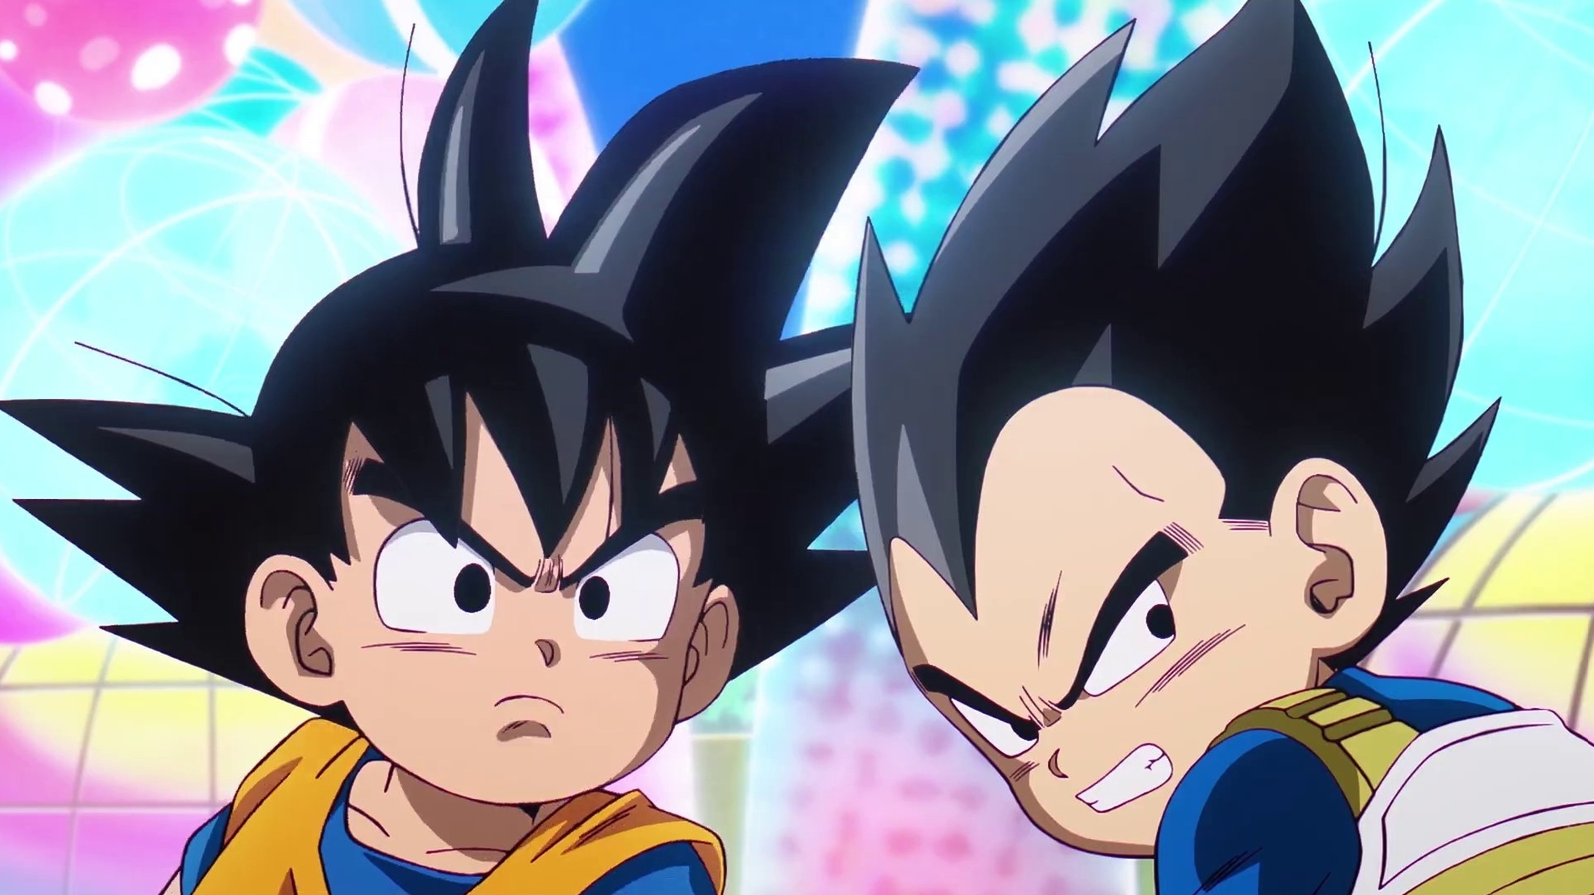 Exciting Times Ahead: Goku's Epic Return in Dragon Ball Daima, Celebrating 40 Years of Adventure and Thrills